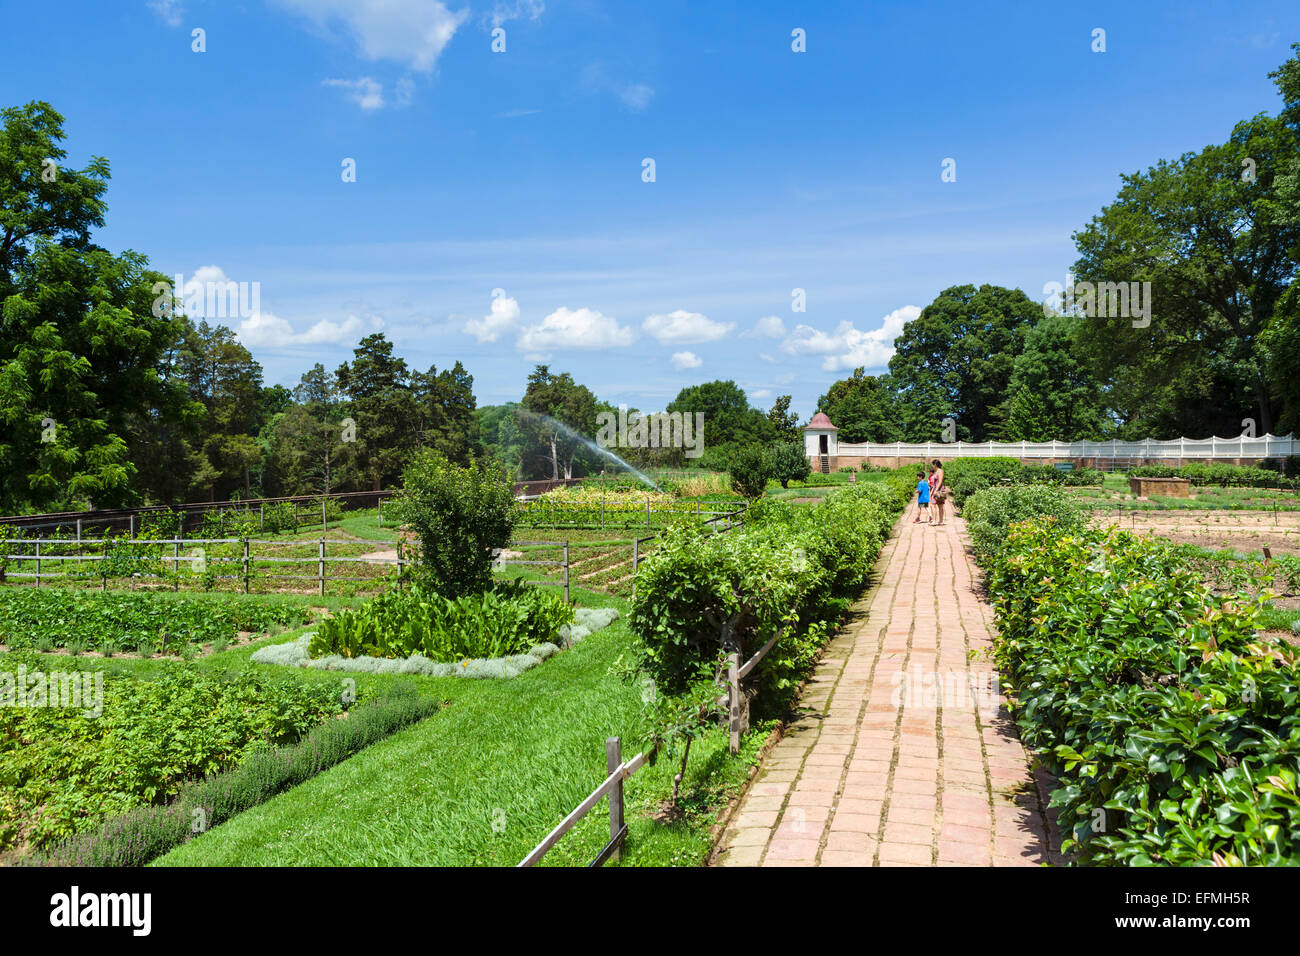 The Lower Garden in the grounds of President George Washington's plantation mansion at Mount Vernon, Fairfax County, Virginia, US Stock Photo